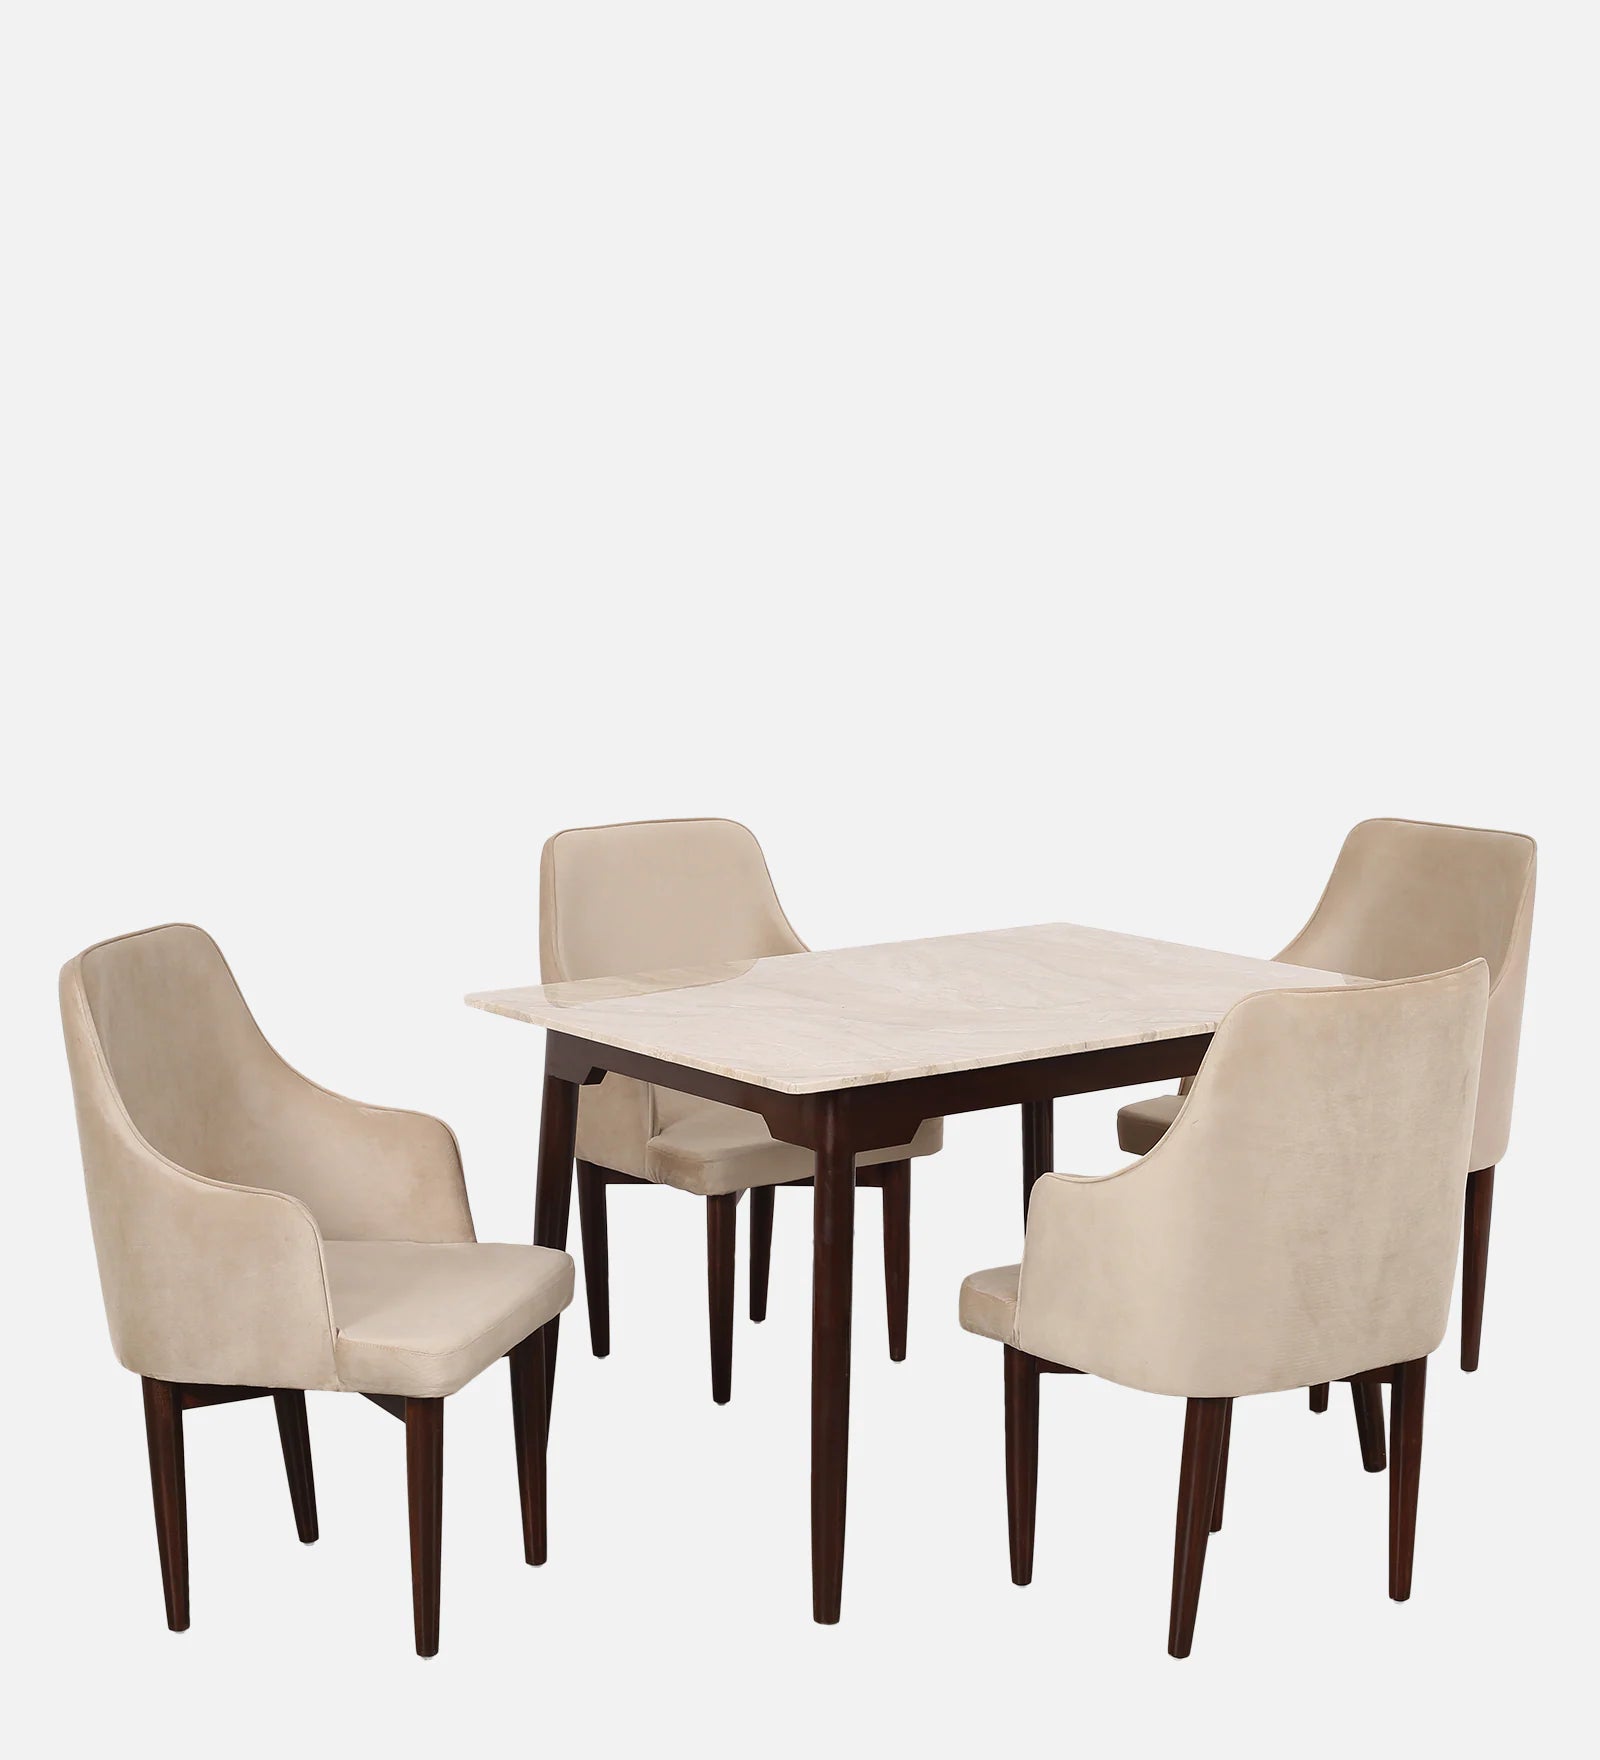 Marble Top 4 Seater Dining Set in Teak Wood Finish